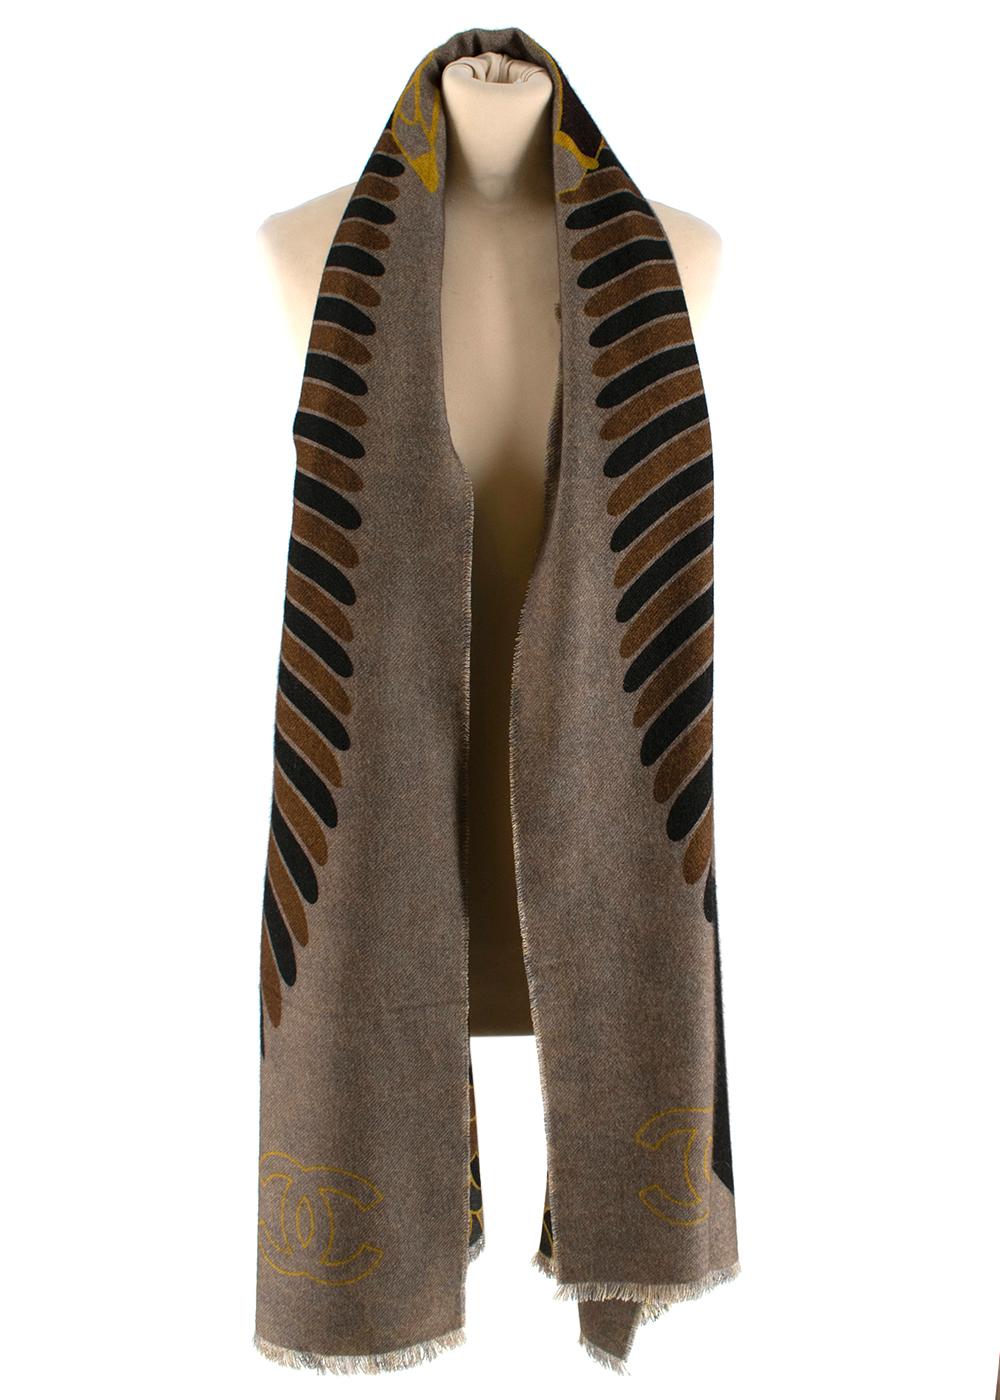 Chanel Brown & Black Cashmere Coco Wings Paris/Egypt Stole

-From the popular Paris/Egypt collection showcasing famous Egyptian heiroglyphics
-Luxuriously soft cashmere texture
-Intricately detailed winged Coco Chanel printed on one side
-Stunning